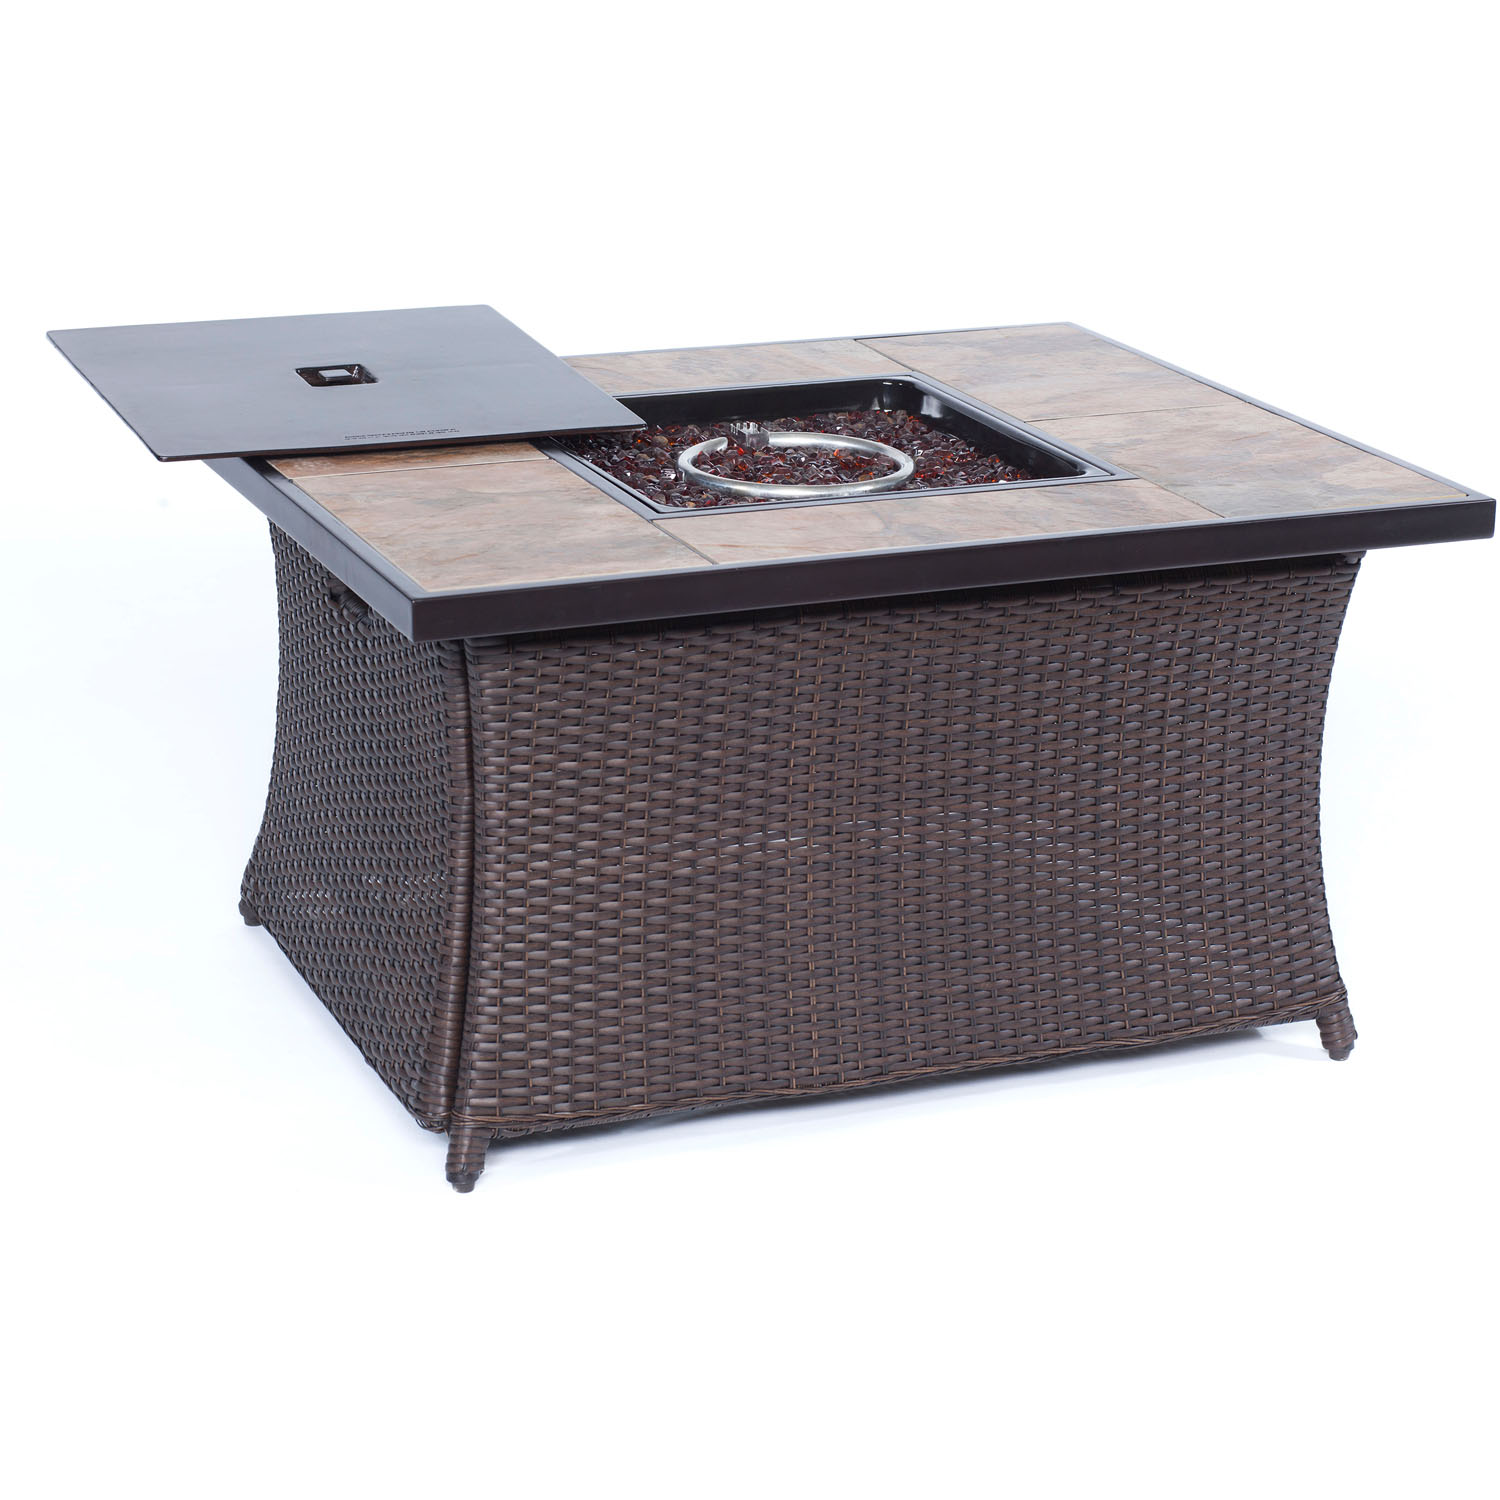 Hanover Metropolitan 3-Piece Woven Fire Pit Lounge Set with Faux-Stone Tile Top - image 5 of 8